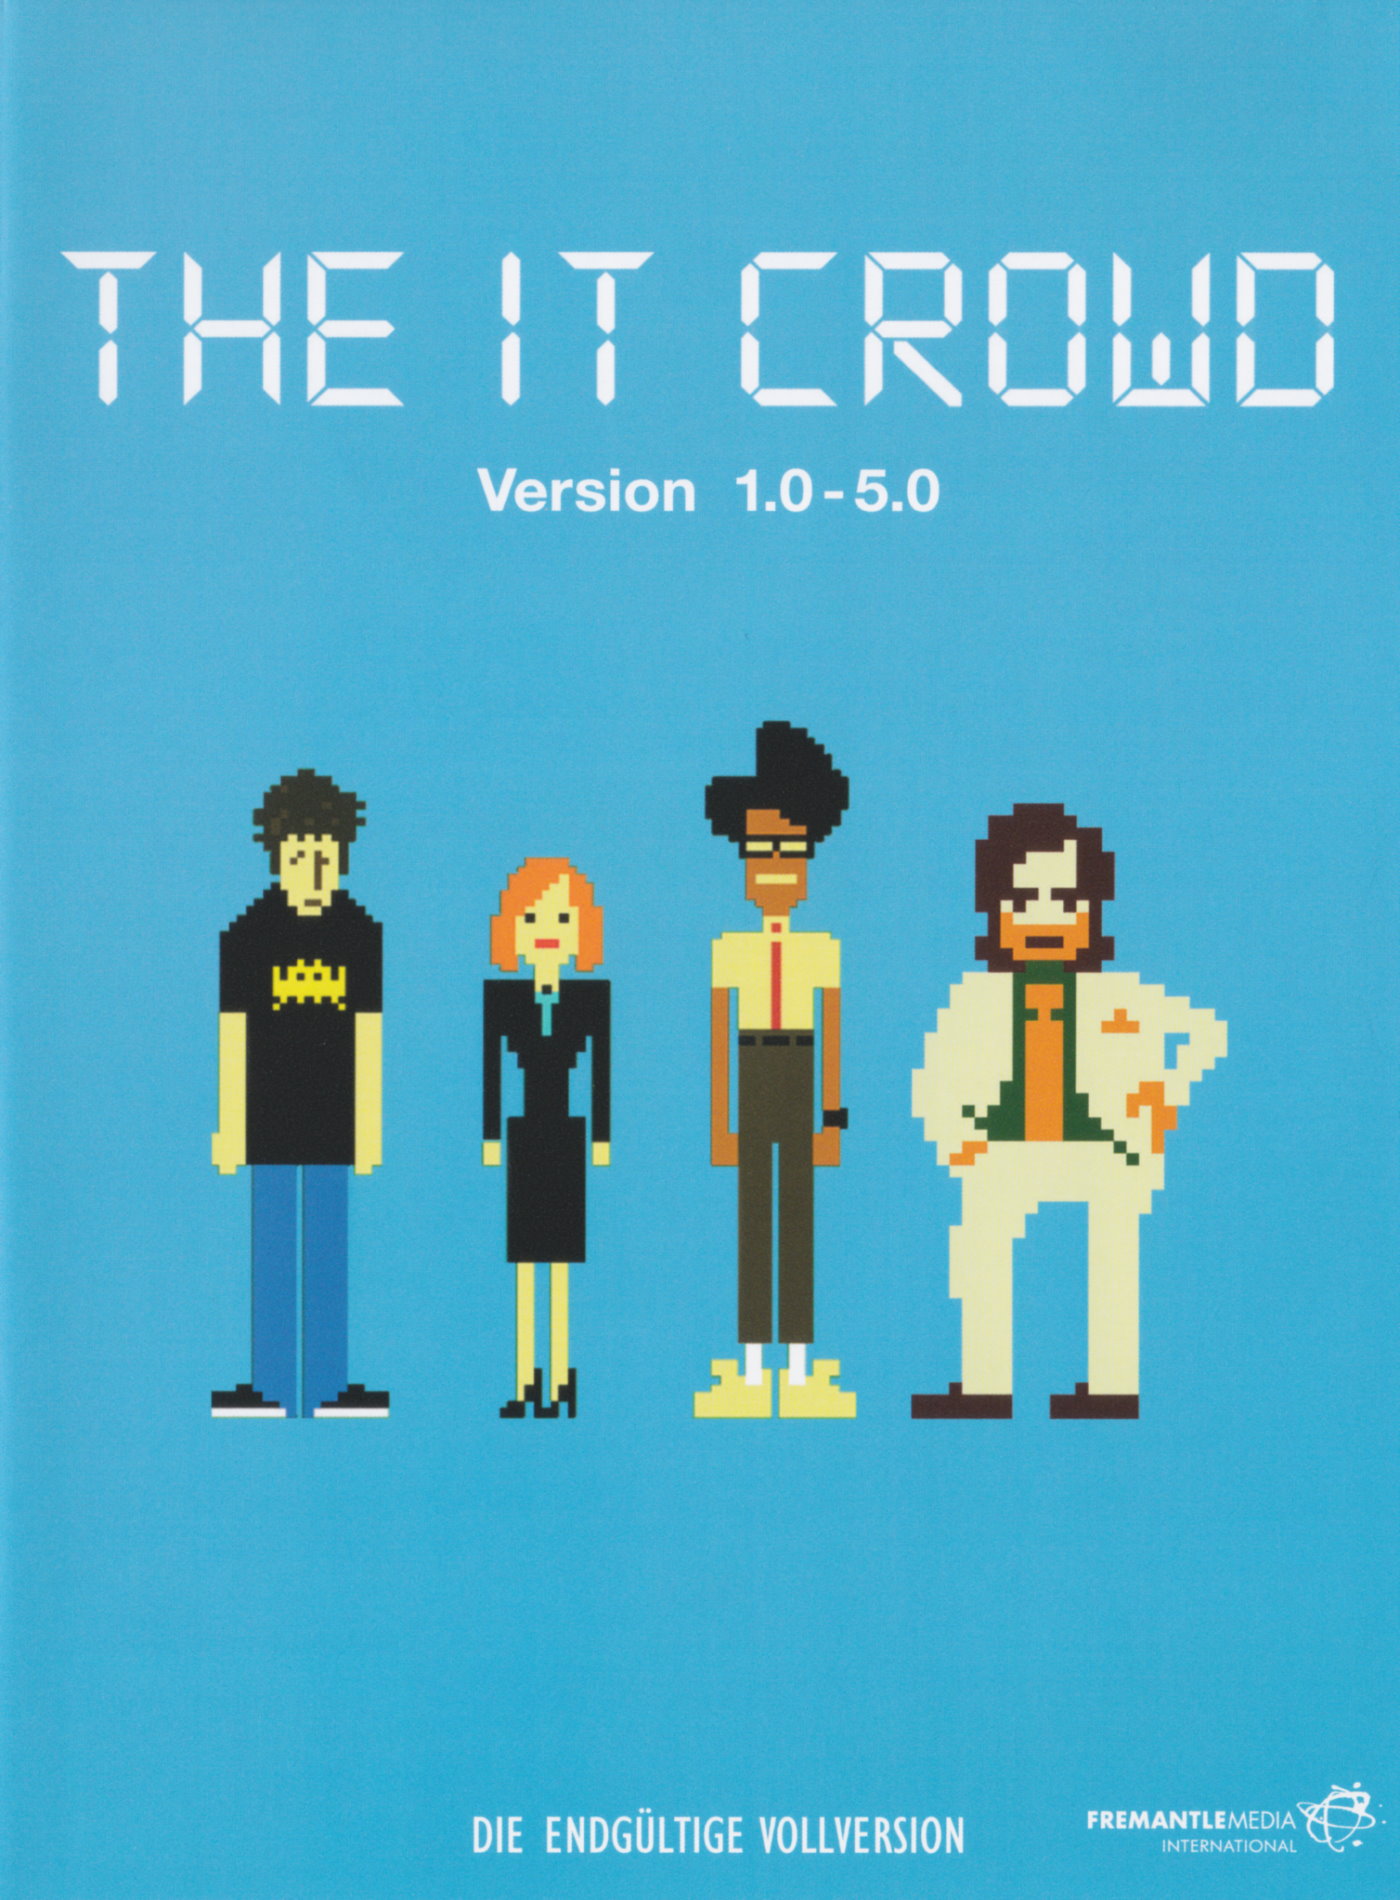 Cover - The IT Crowd.jpg